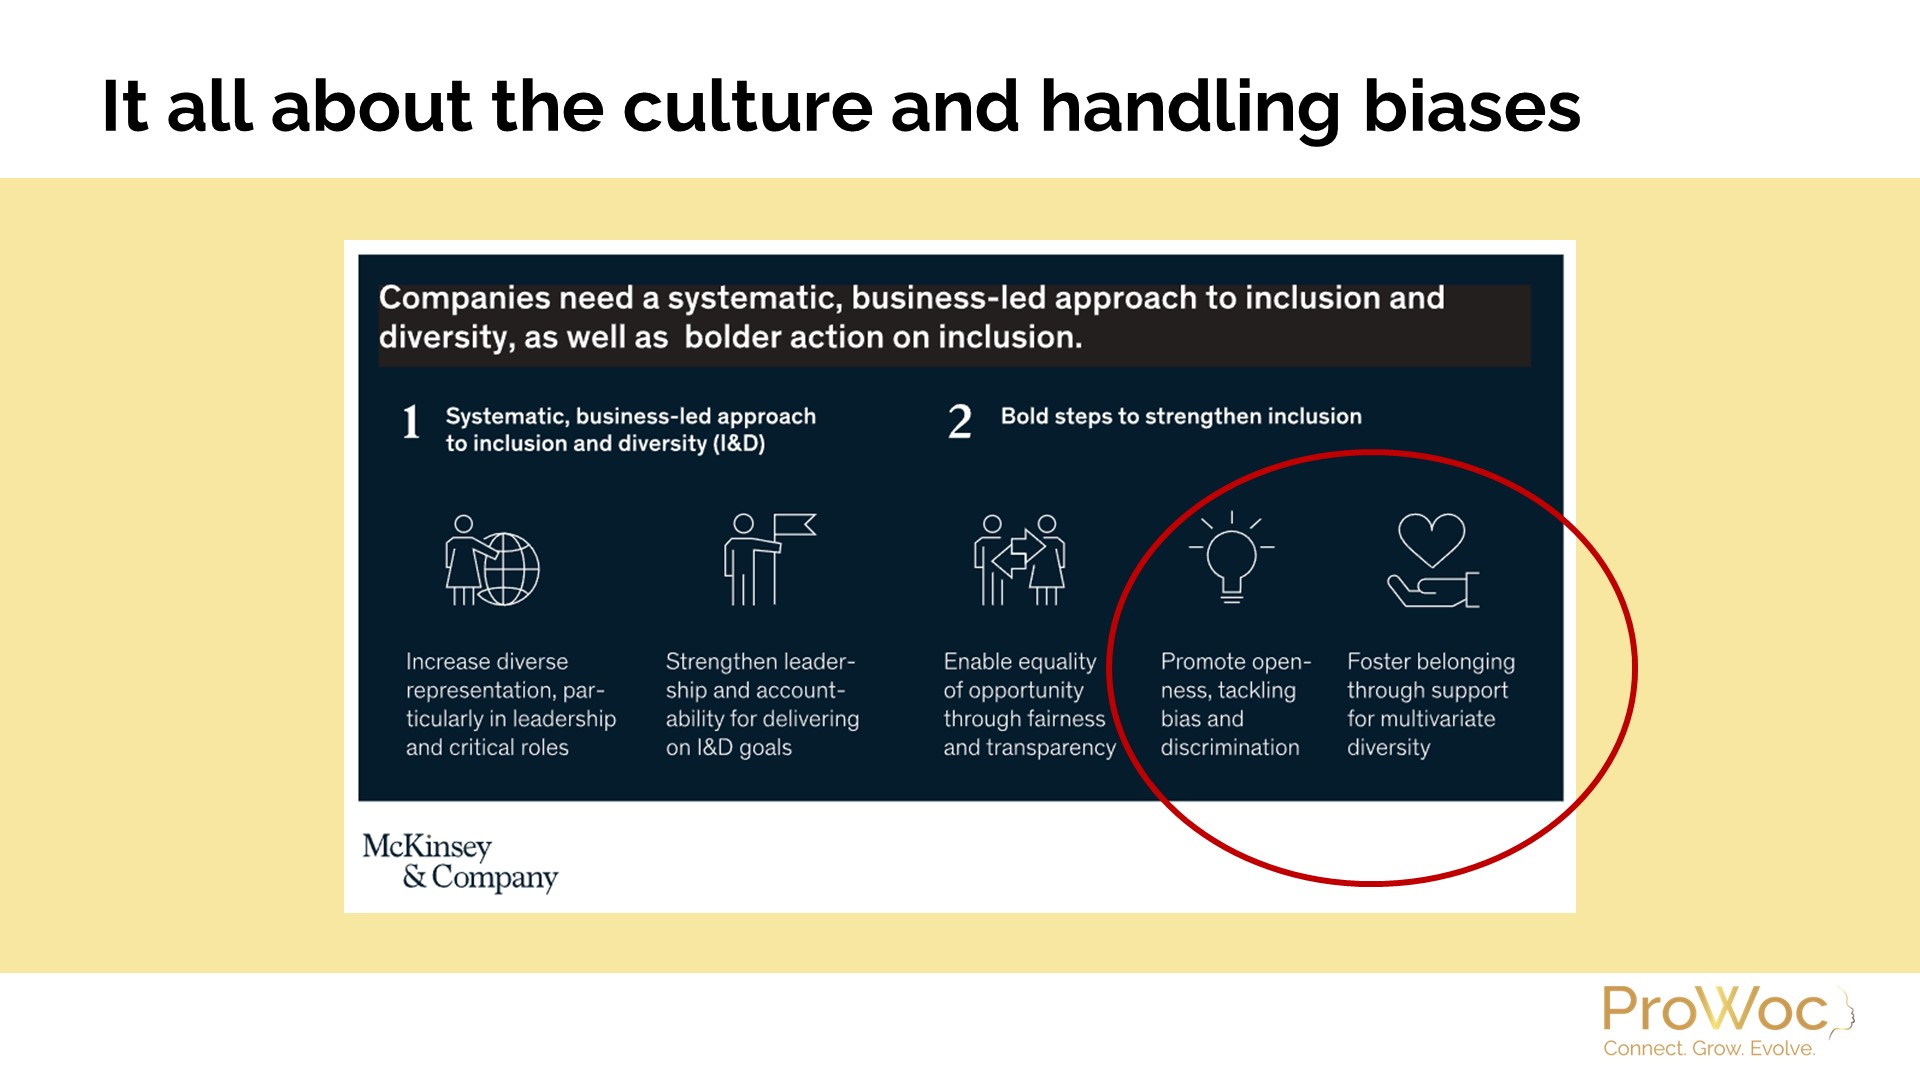 It's all about the culture and handling biases